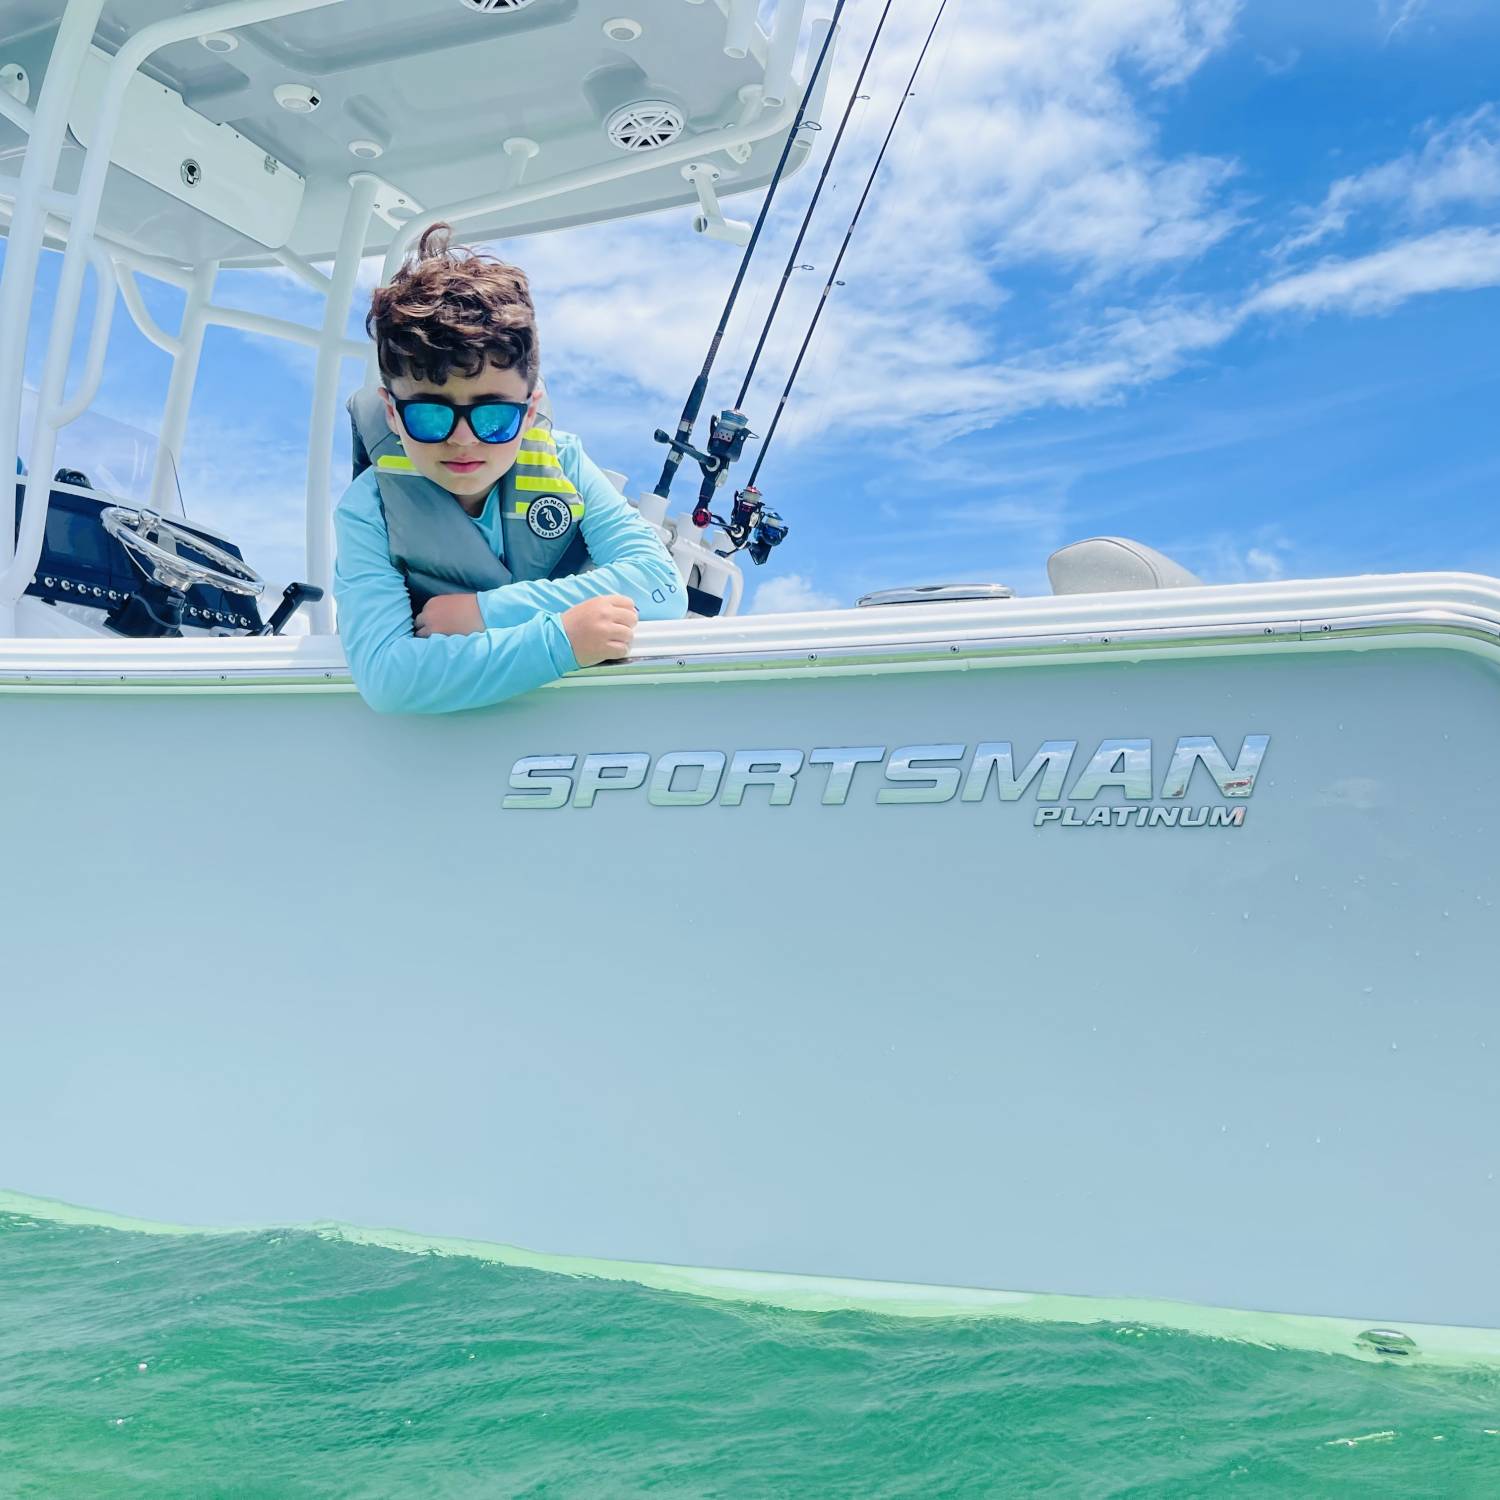 Title: Captivating - On board their Sportsman Open 232 Center Console - Location: Elliott Key. Participating in the Photo Contest #SportsmanAugust